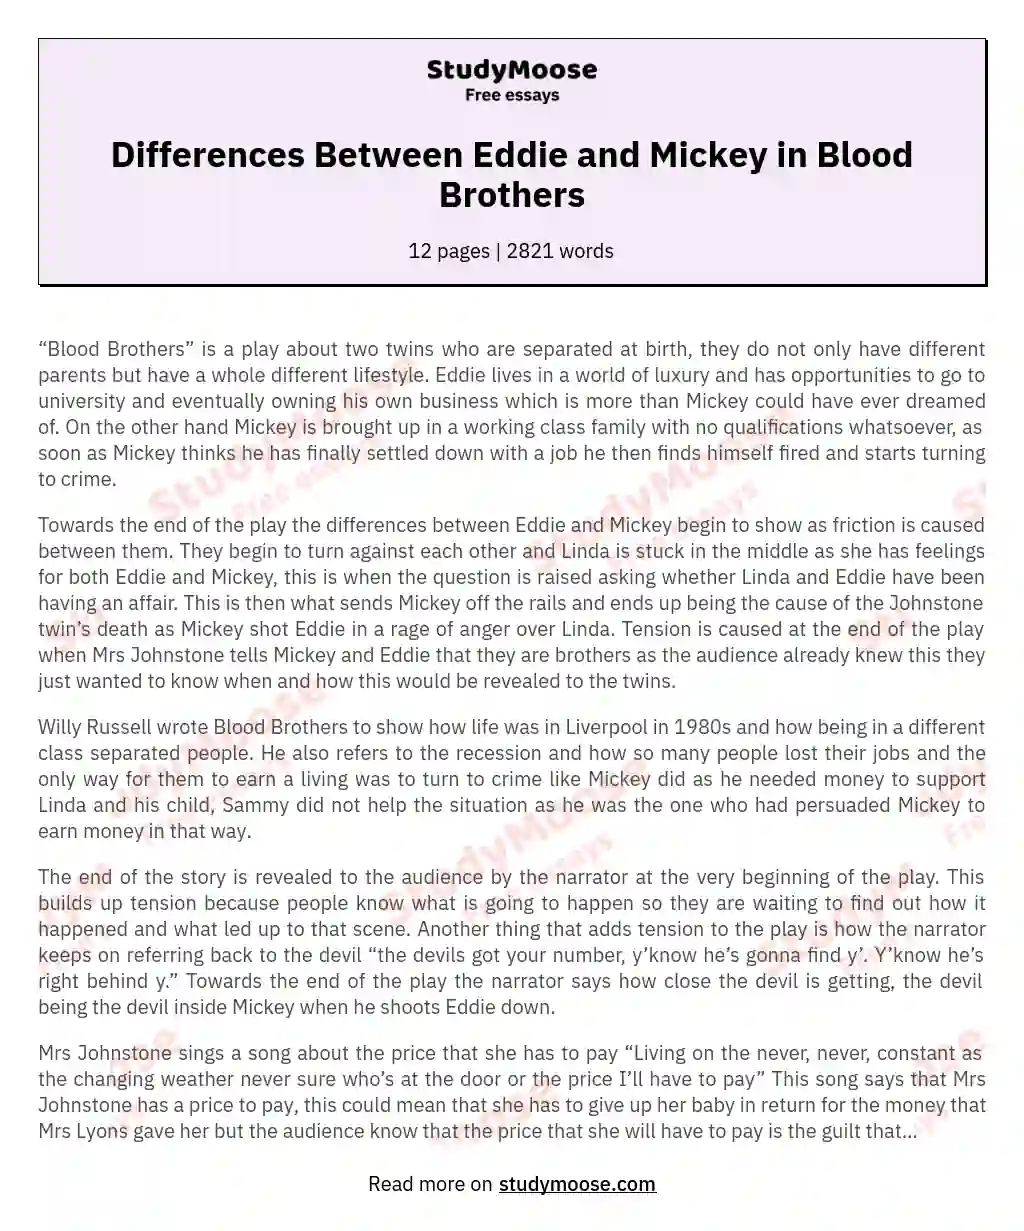 Differences Between Eddie and Mickey in Blood Brothers essay